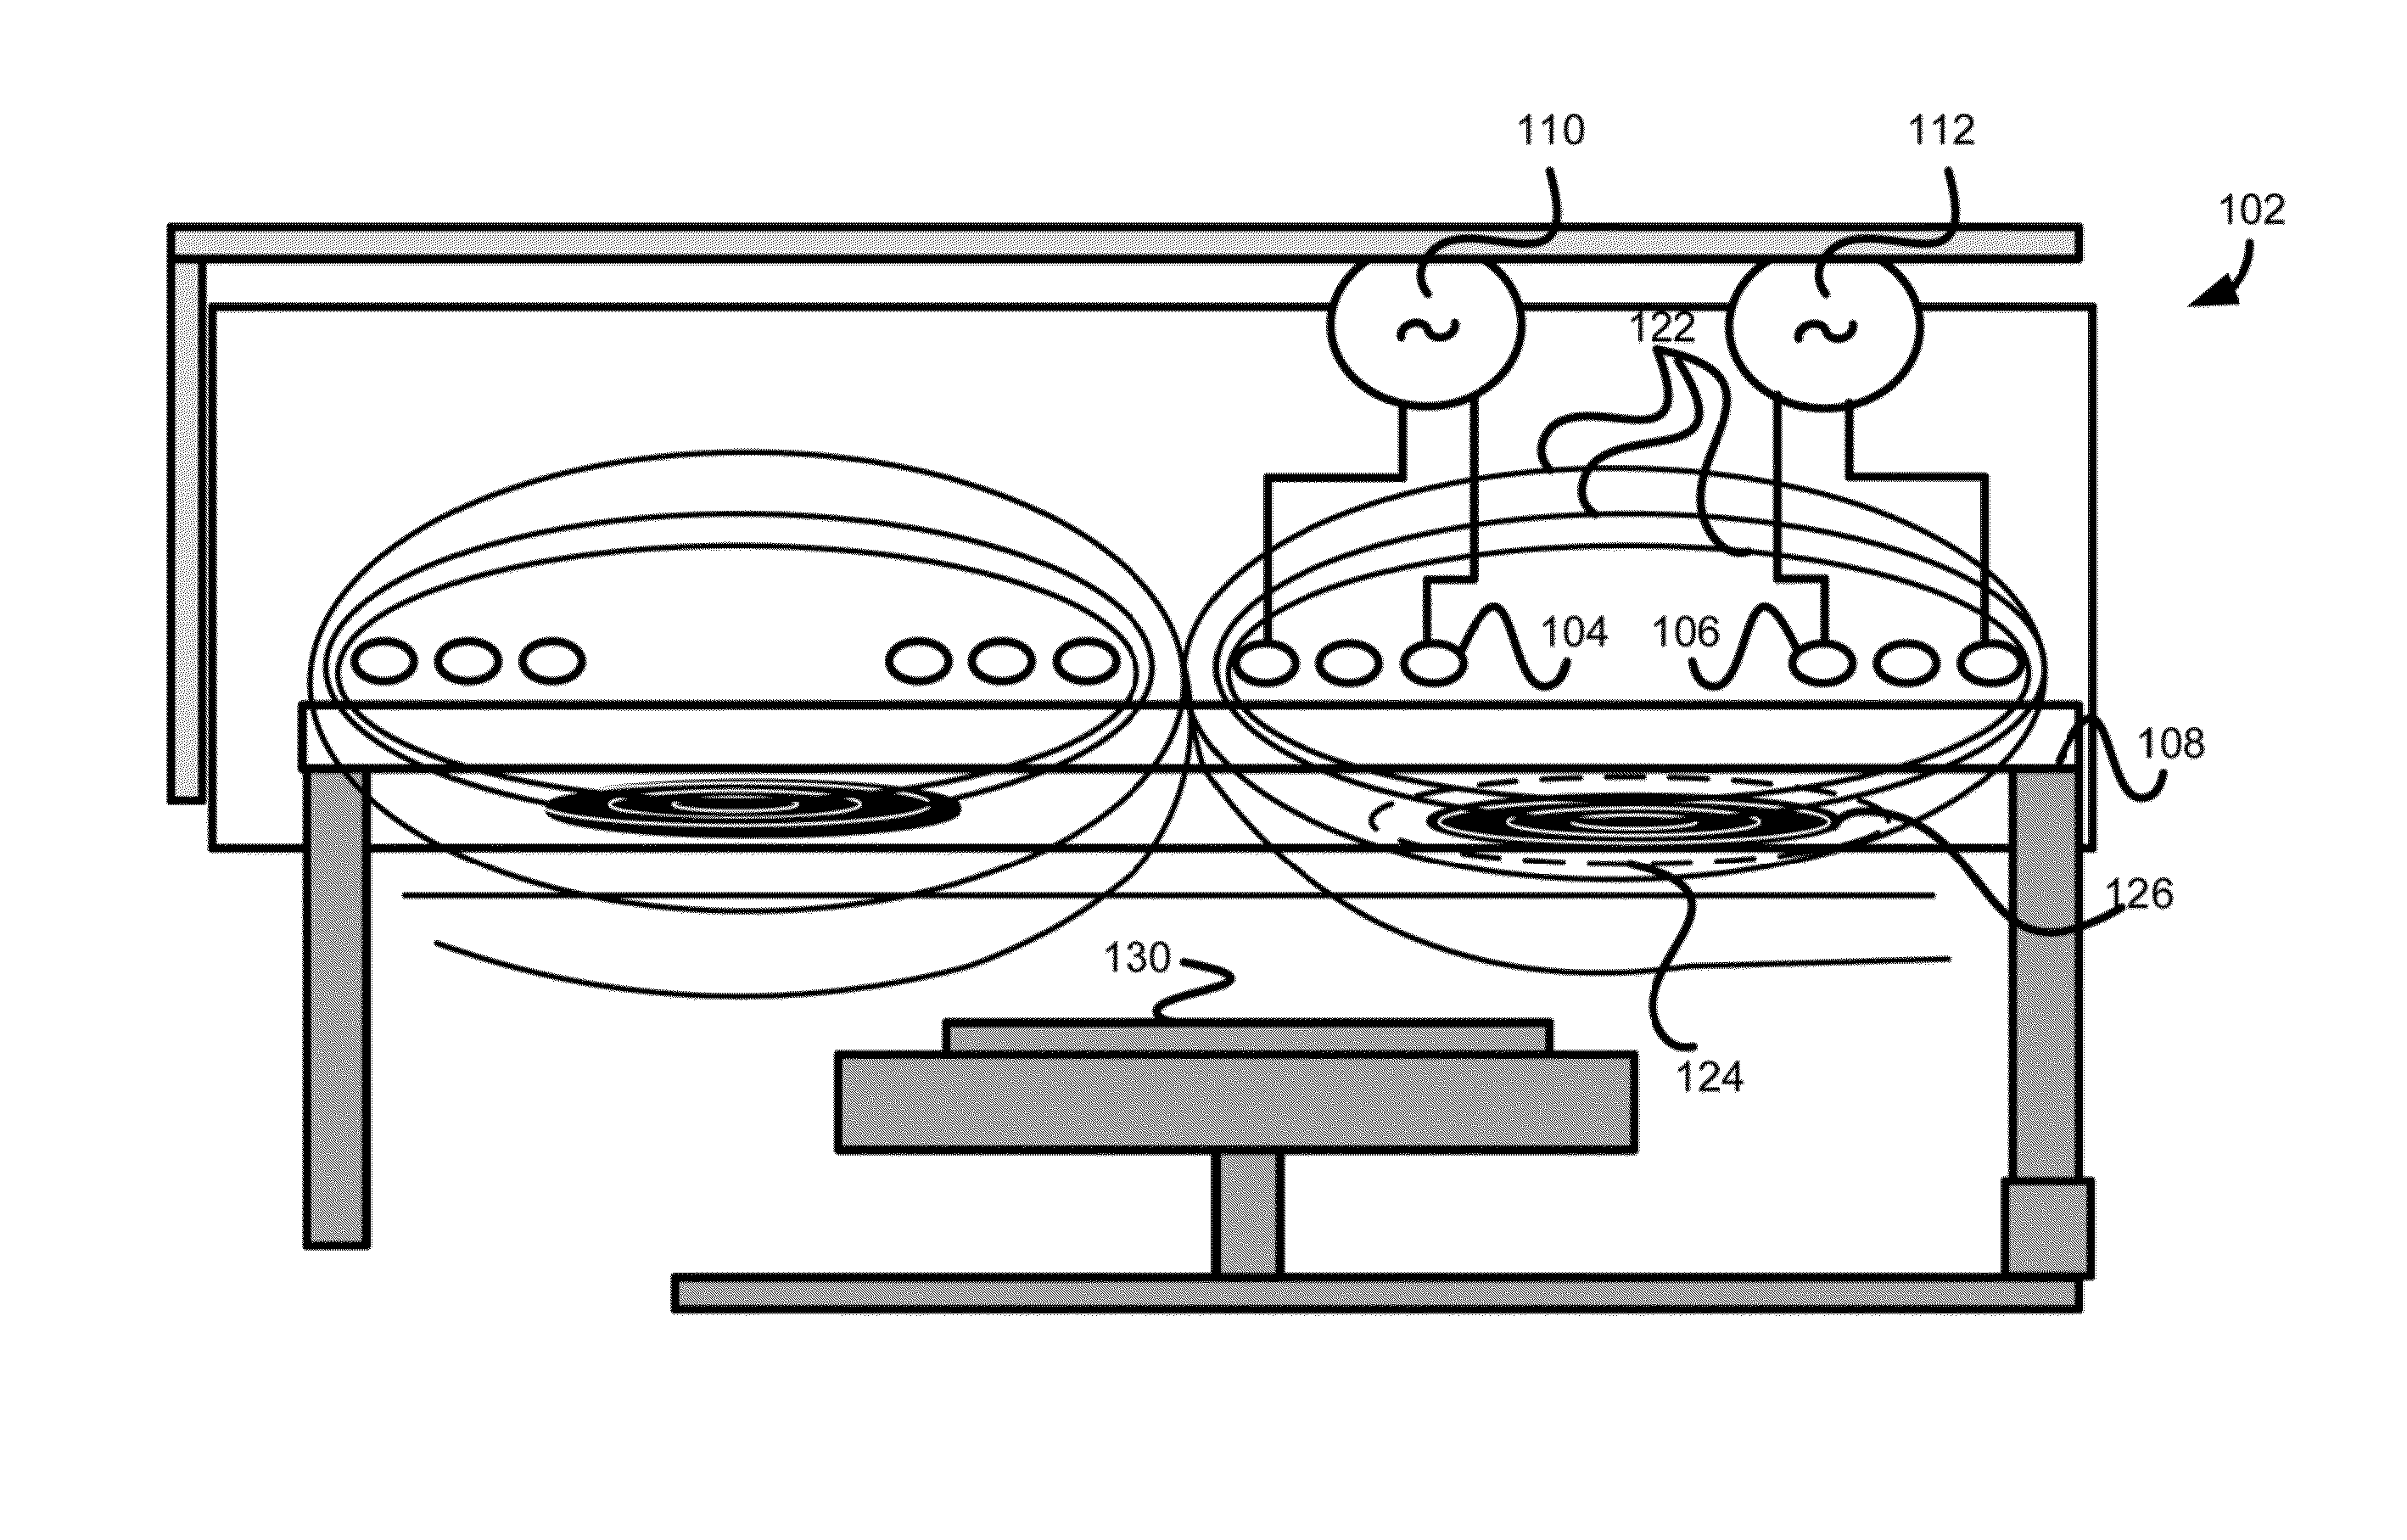 Methods and apparatuses for controlling plasma in a plasma processing chamber